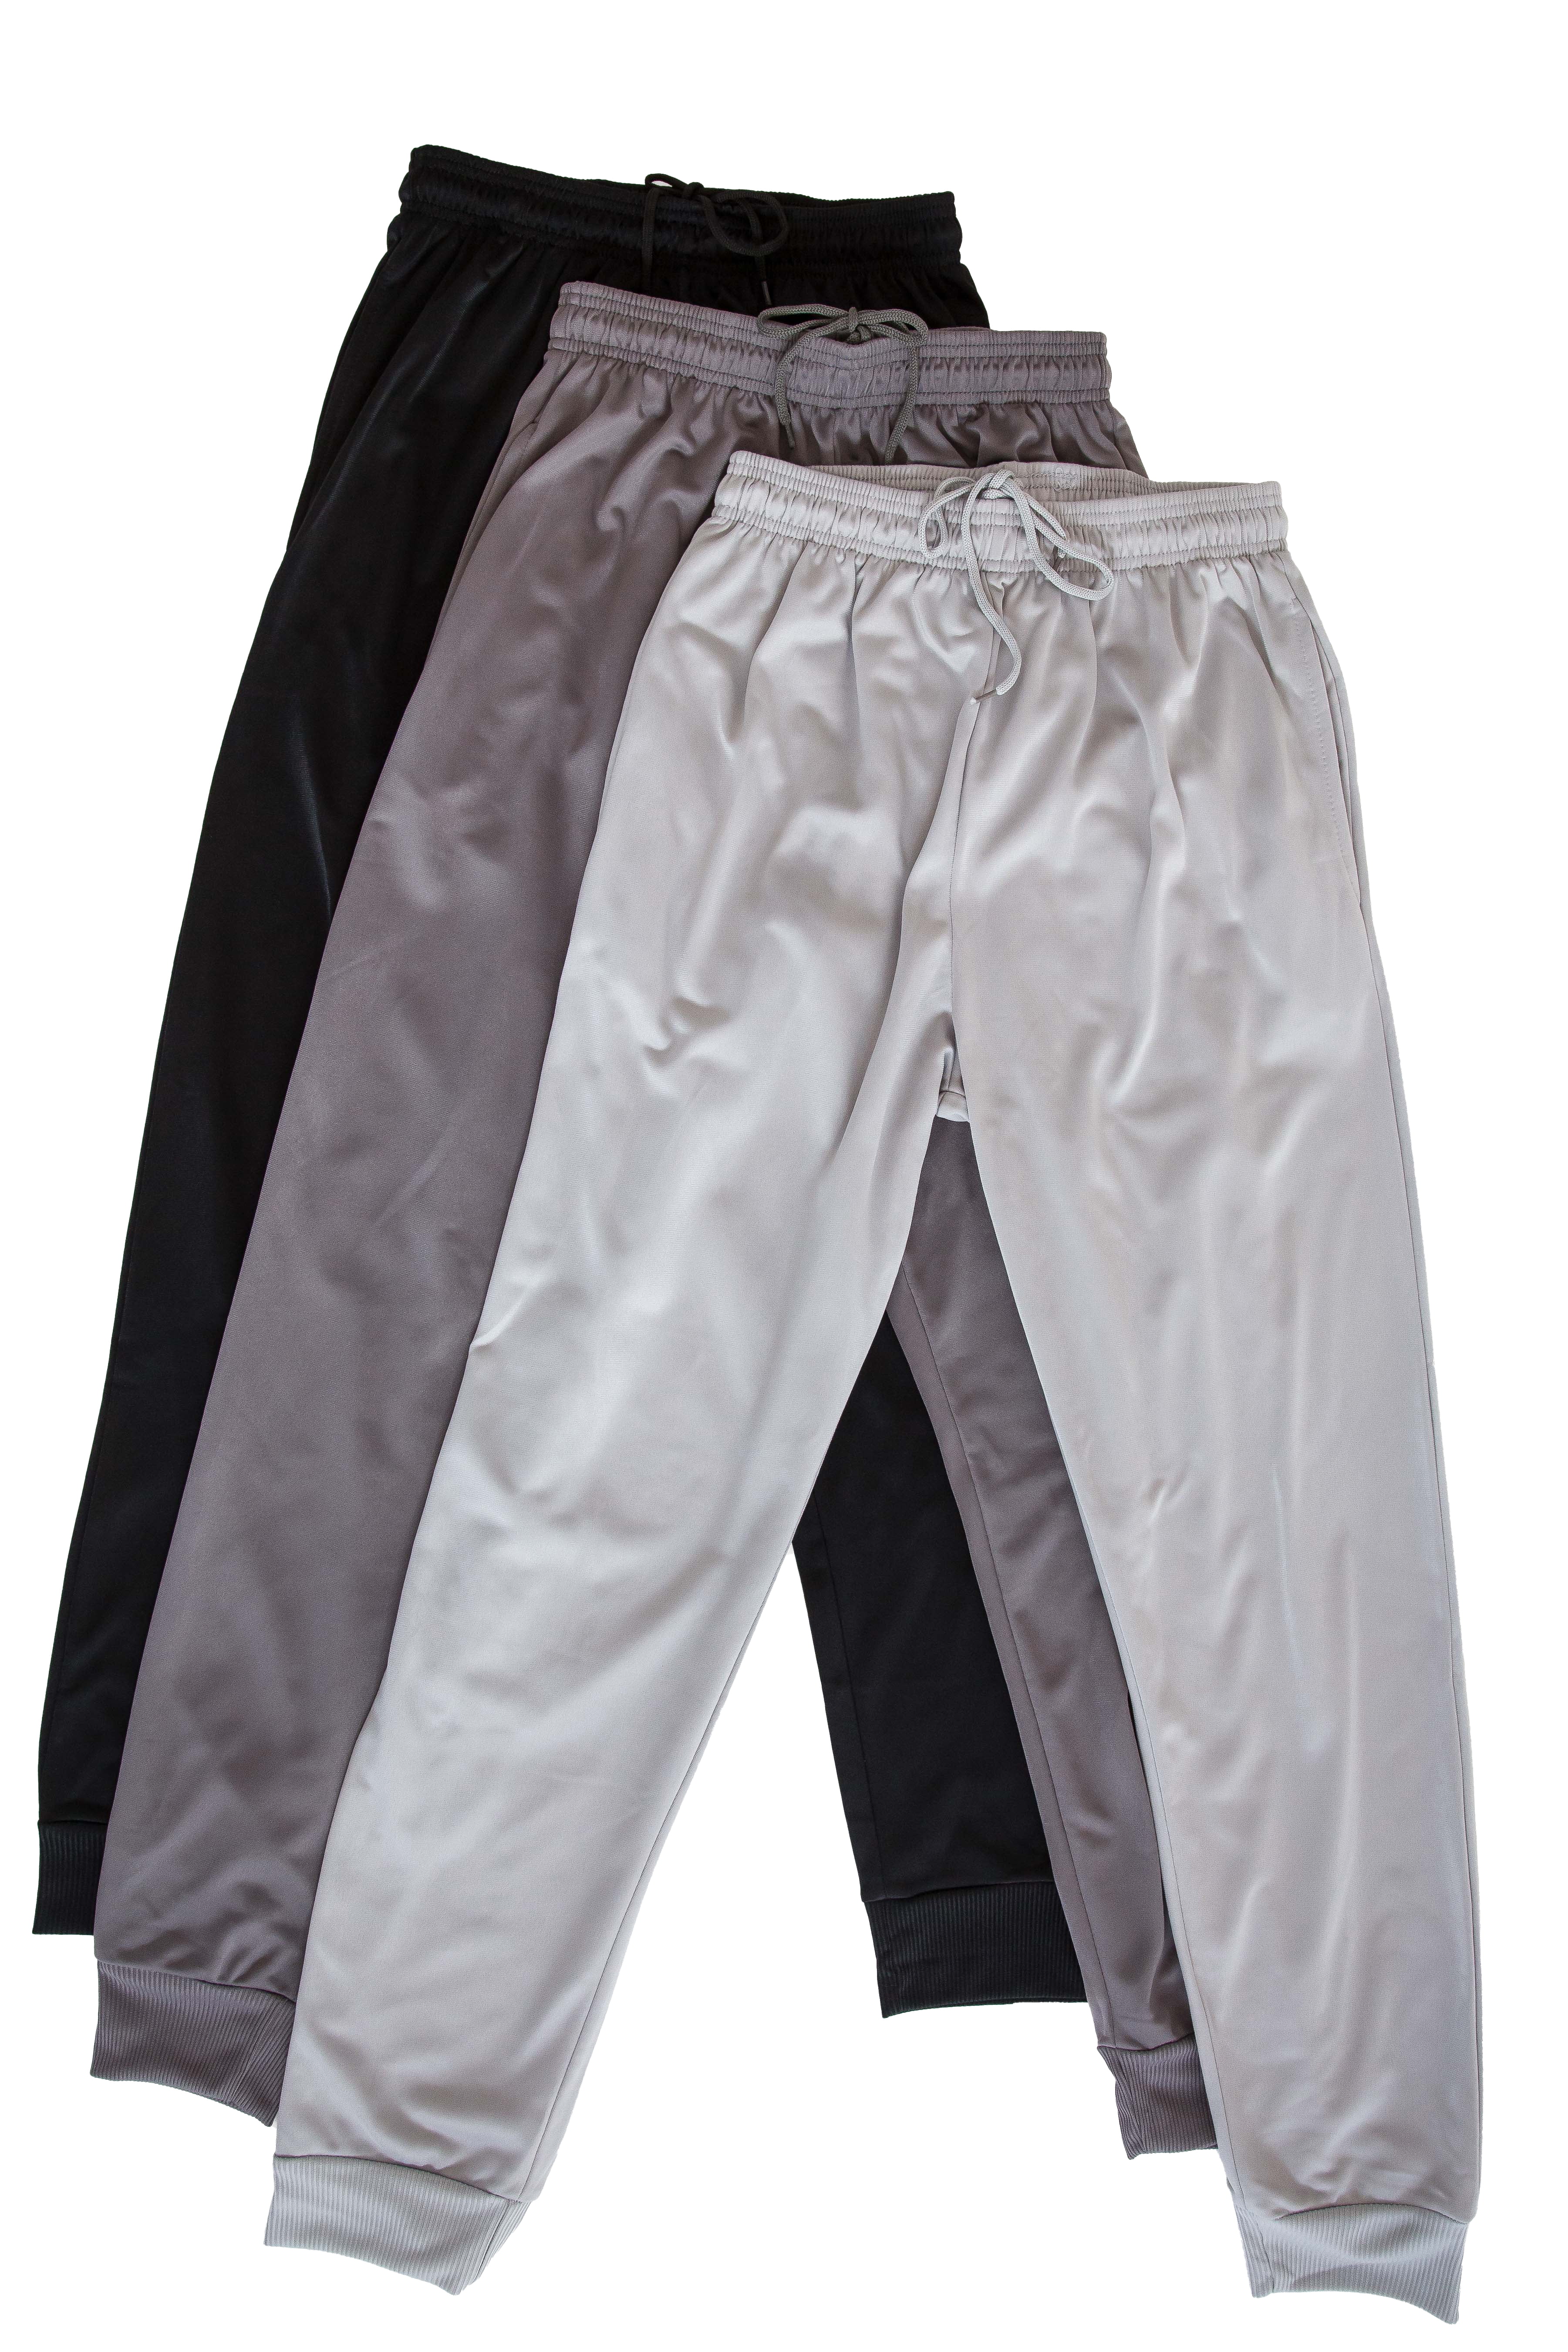 Real Essentials 3 Pack Boys' Mesh Open Bottom Active Sweatpants with Pockets & Drawstring 